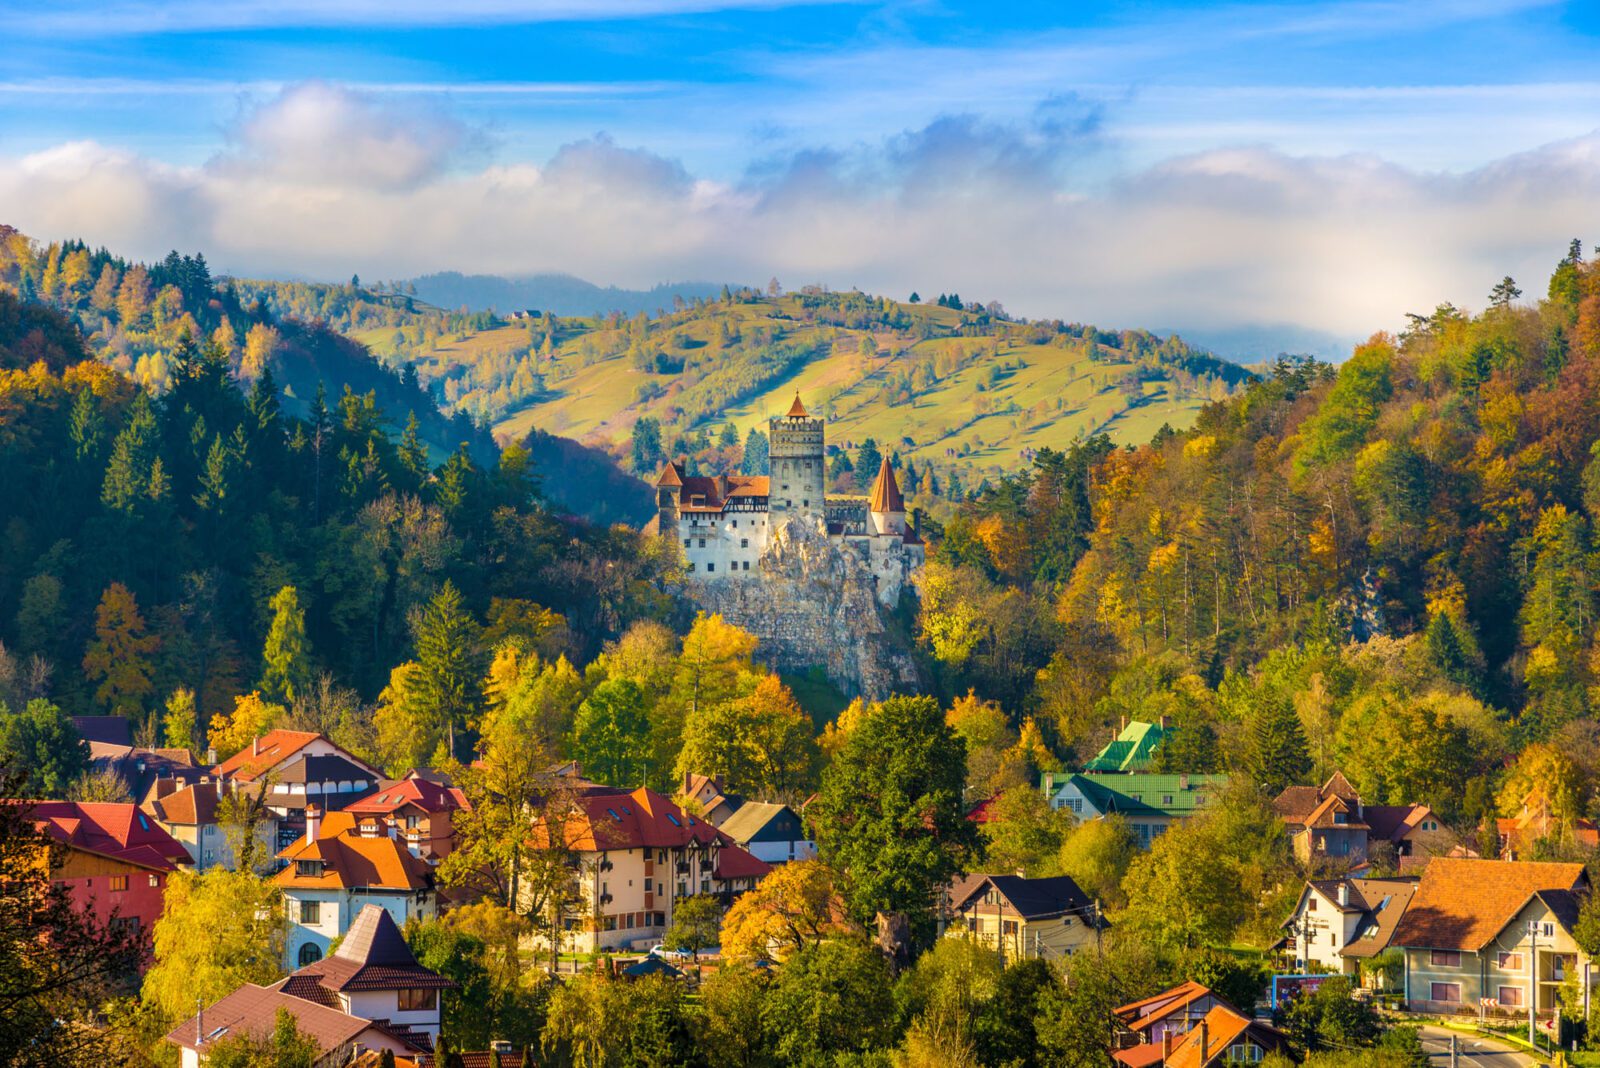 Panoramic view over Dracula medieval Castle Bran in autumn seaso